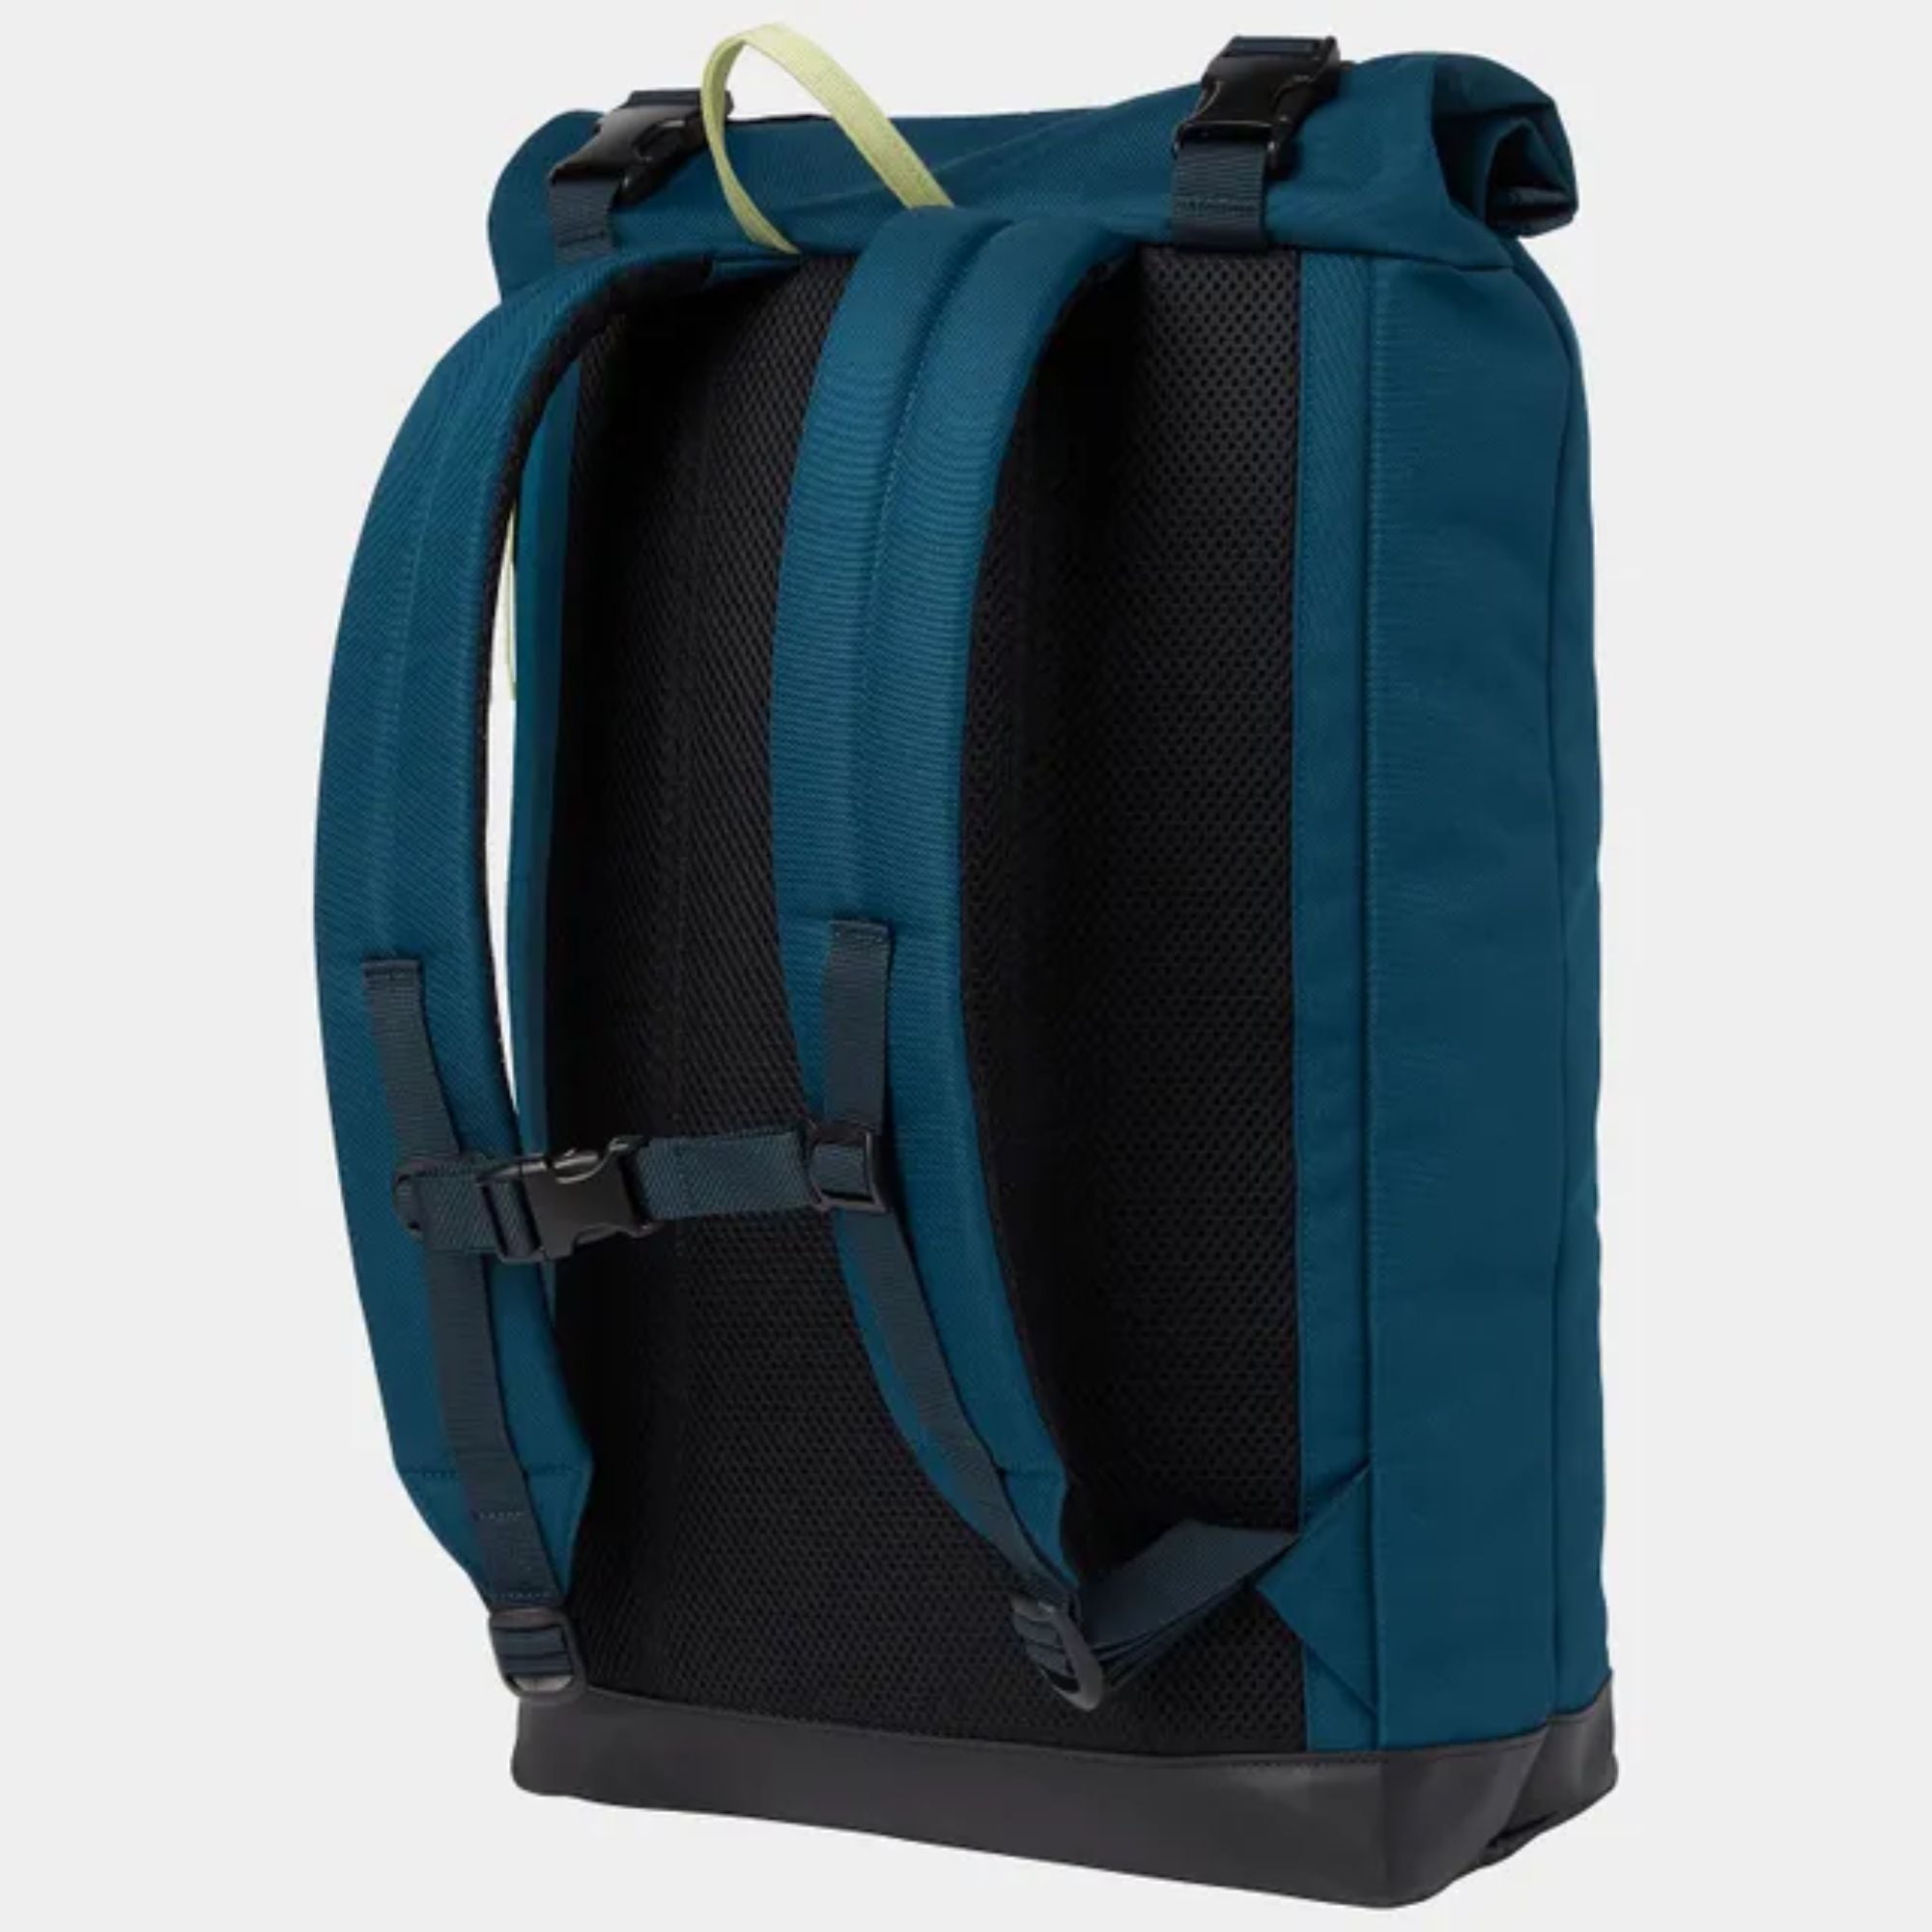 Helly Hansen Stockholm Backpack | HELLY HANSEN | Portwest - The Outdoor Shop